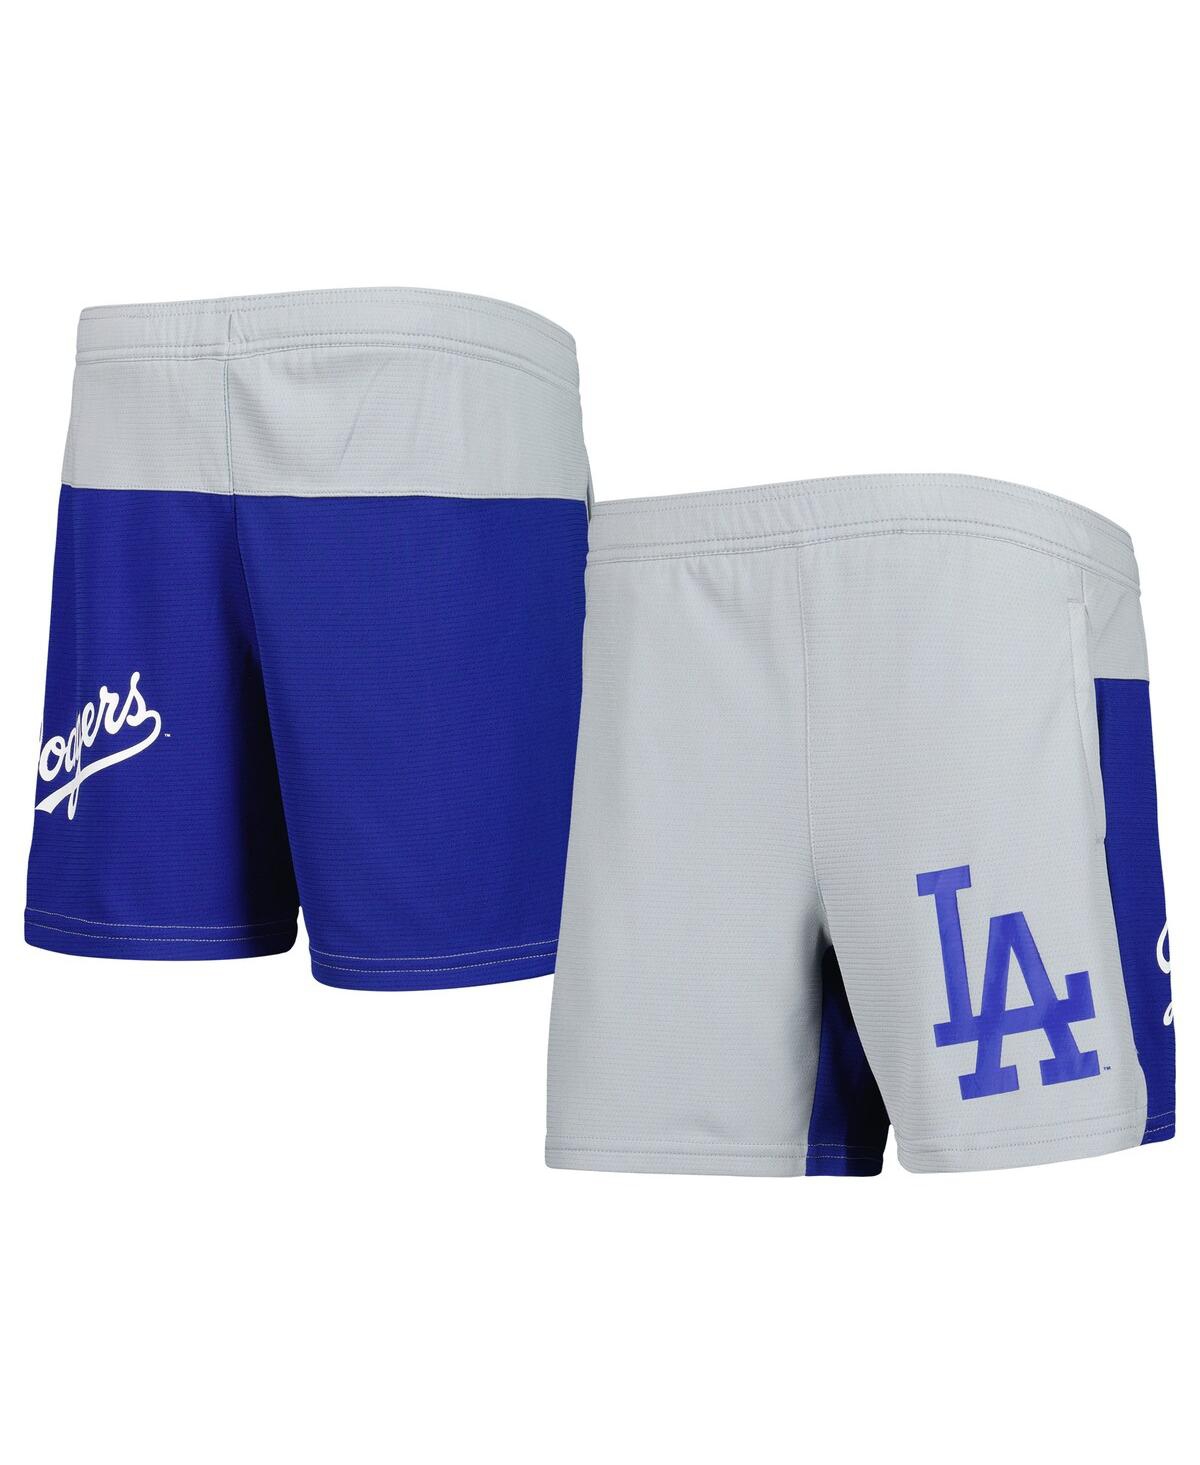 Outerstuff Kids' Big Boys And Girls Gray Los Angeles Dodgers 7th Inning Stretch Shorts